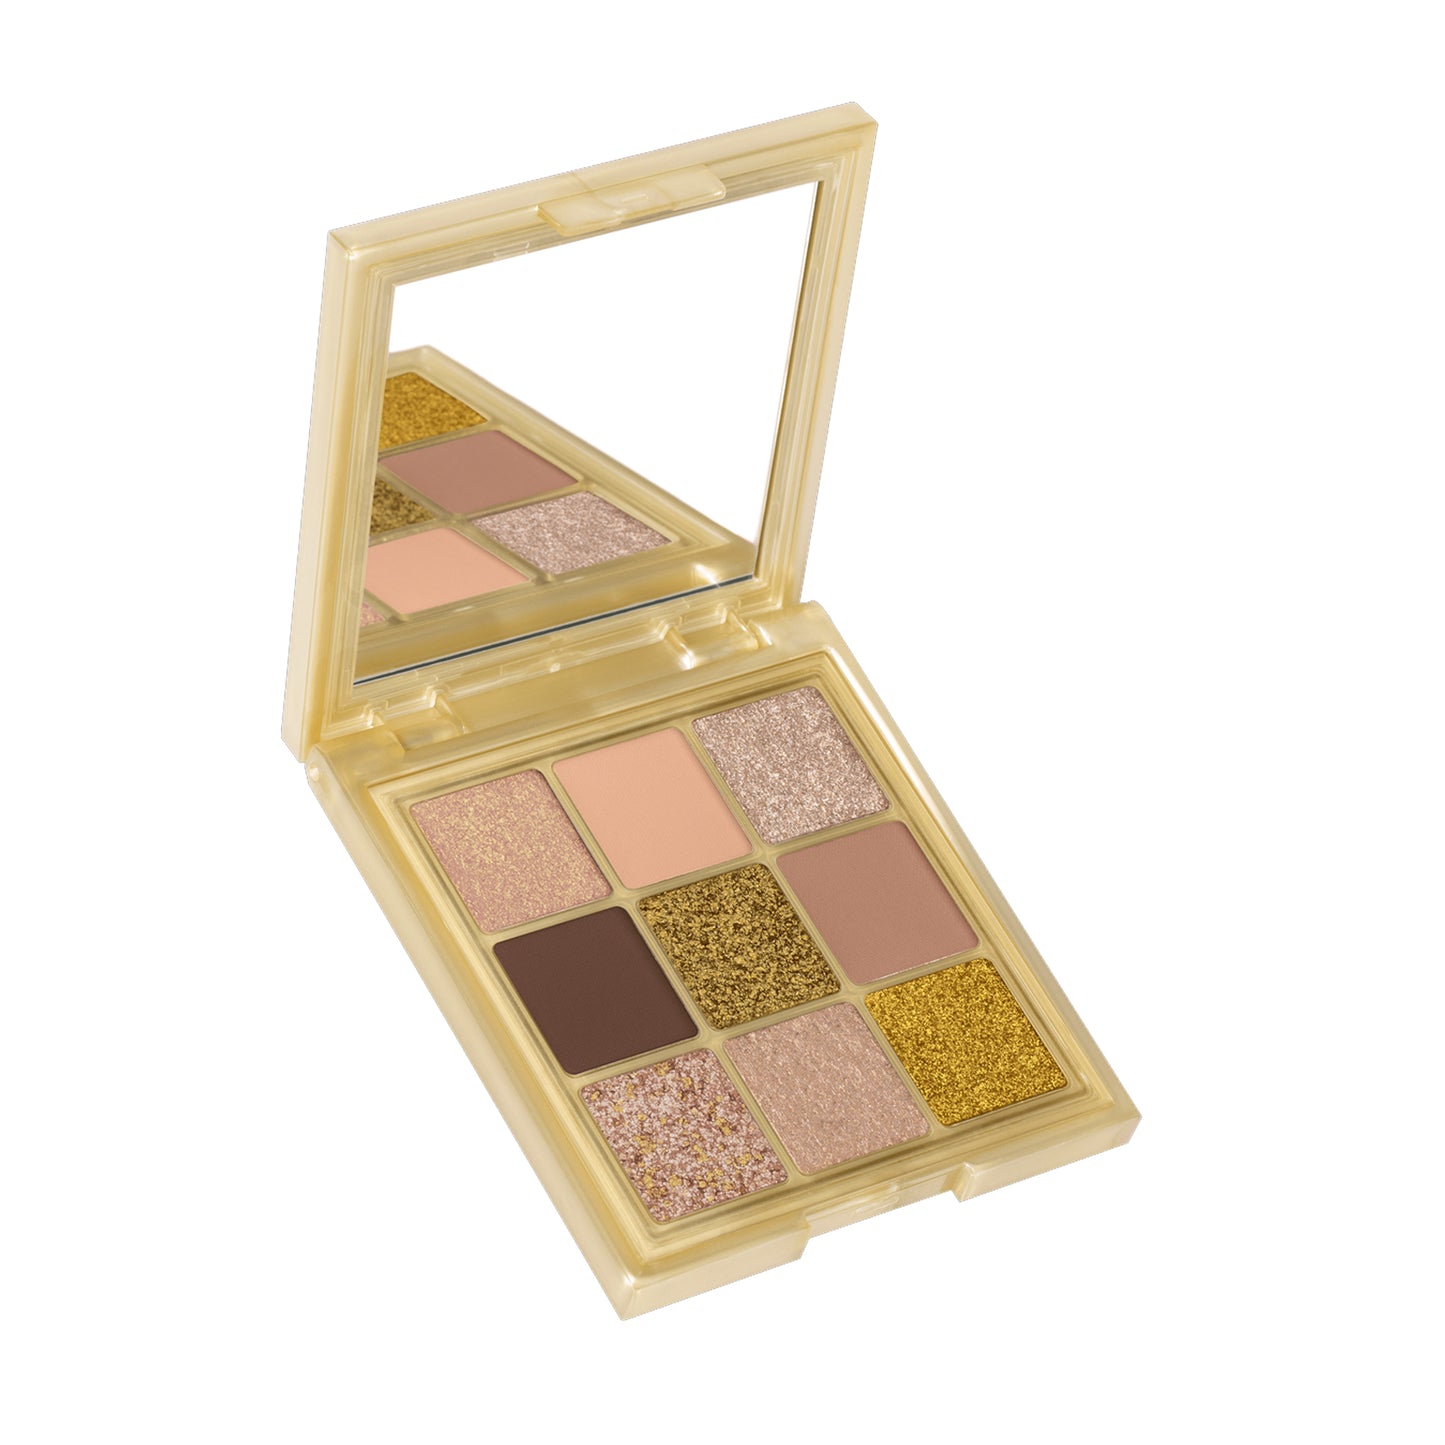 HUDA BEAUTY - GOLD OBSESSIONS EYESHADOW PALETTE